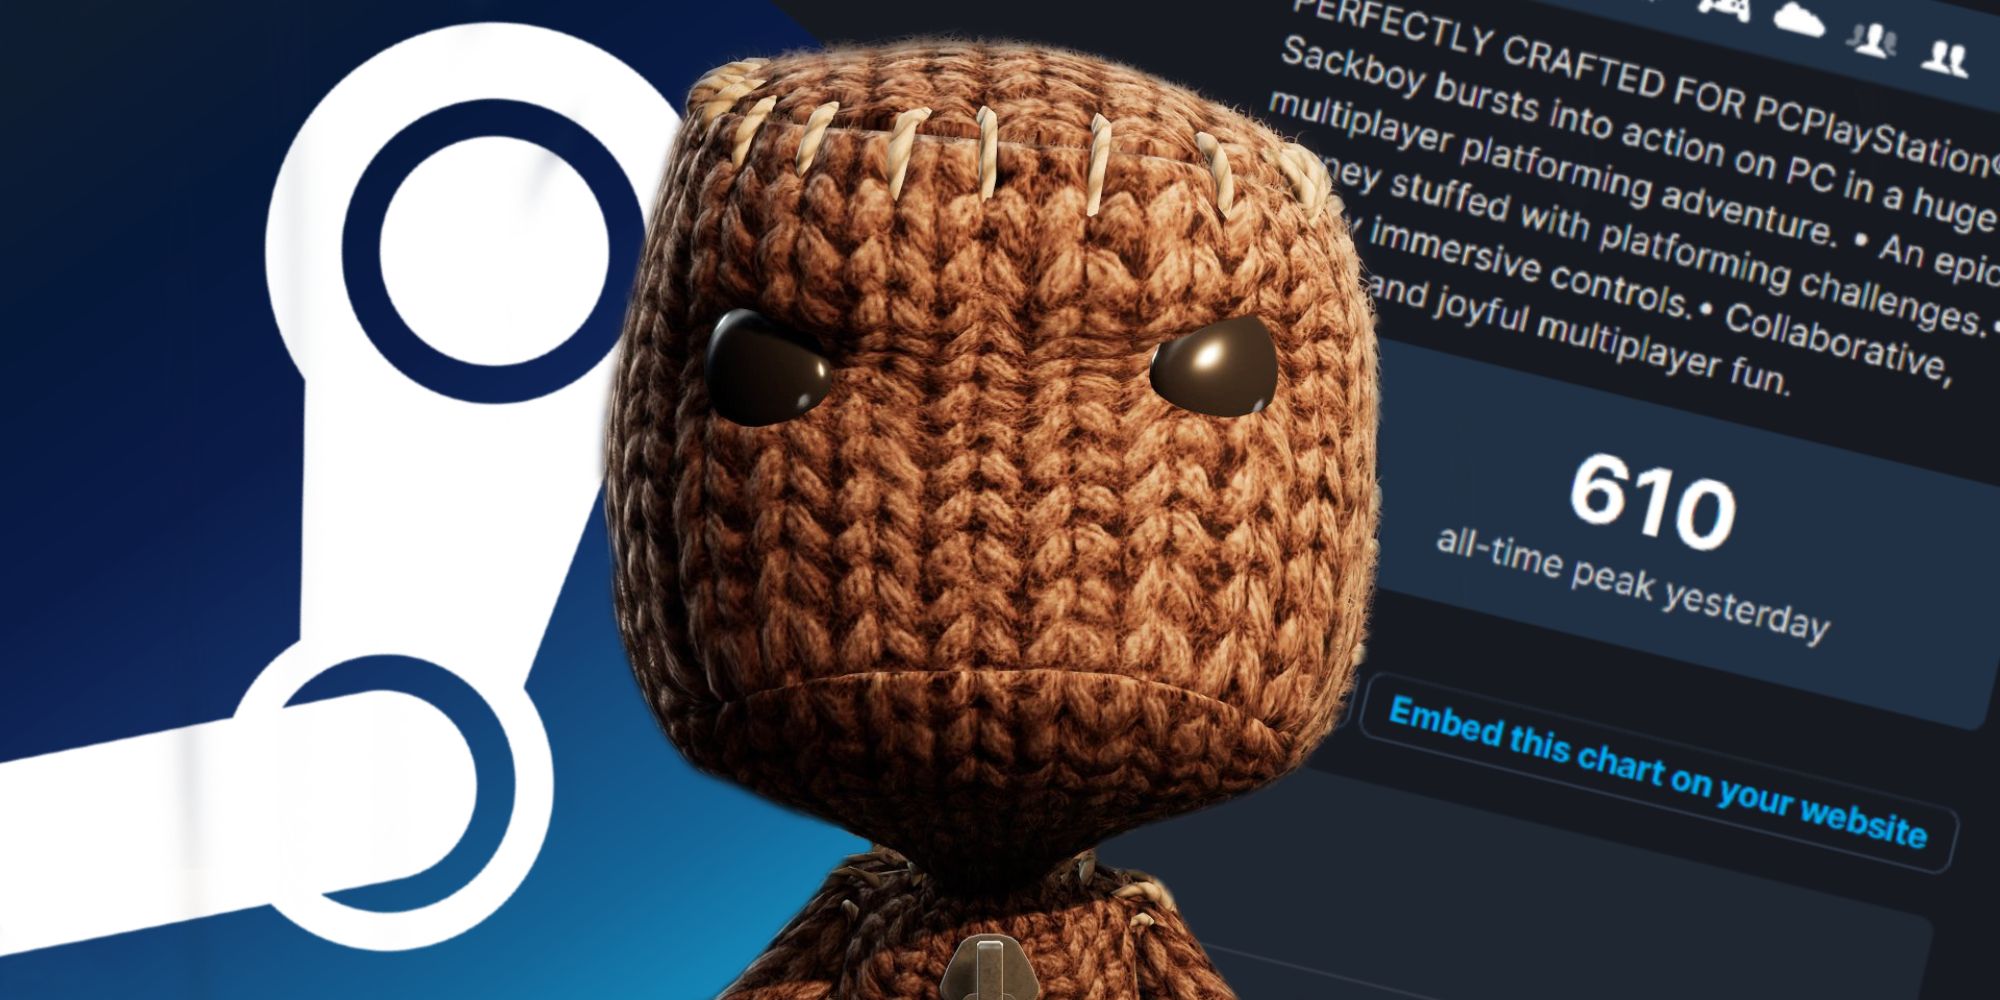 Angry Sackboy in front of a Steam logo and a low player peak number